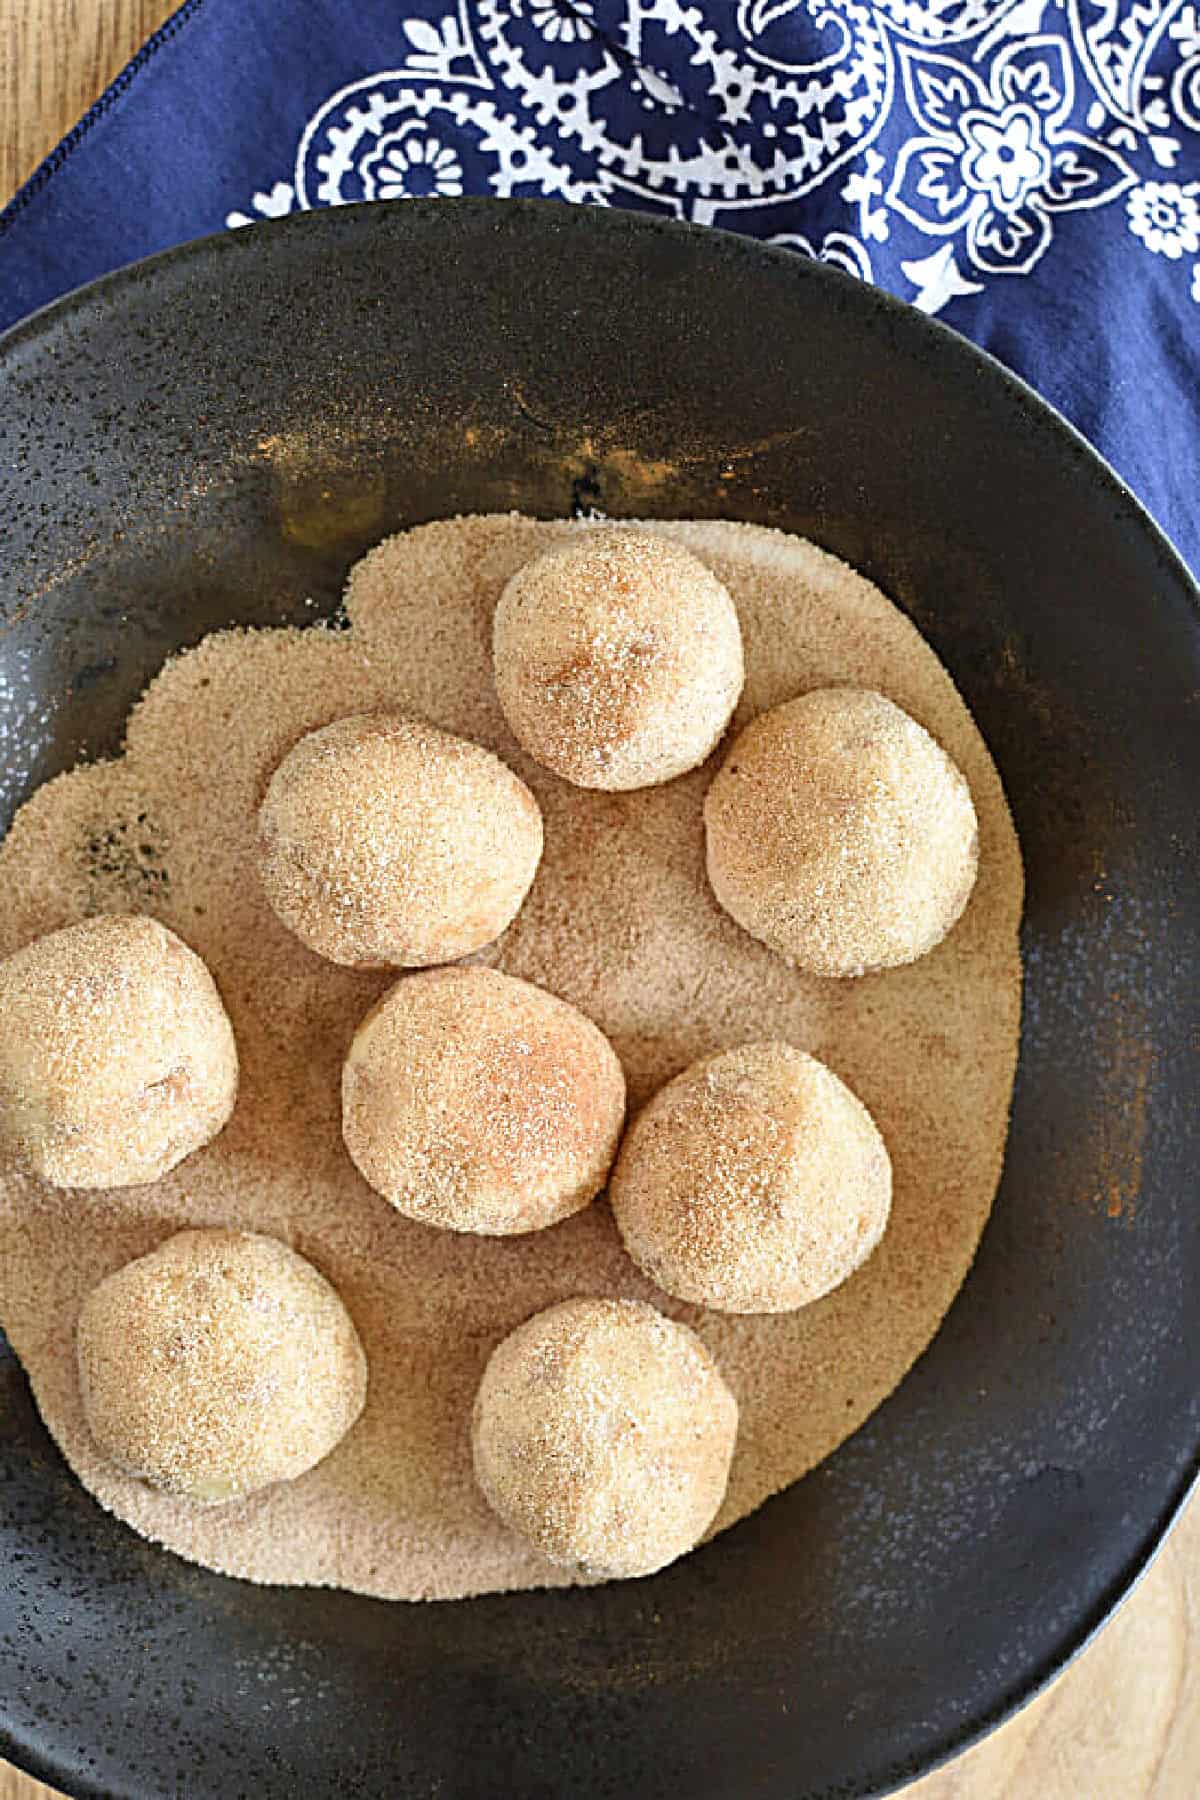 Cookie dough balls rolled in cinnamon and sugar.